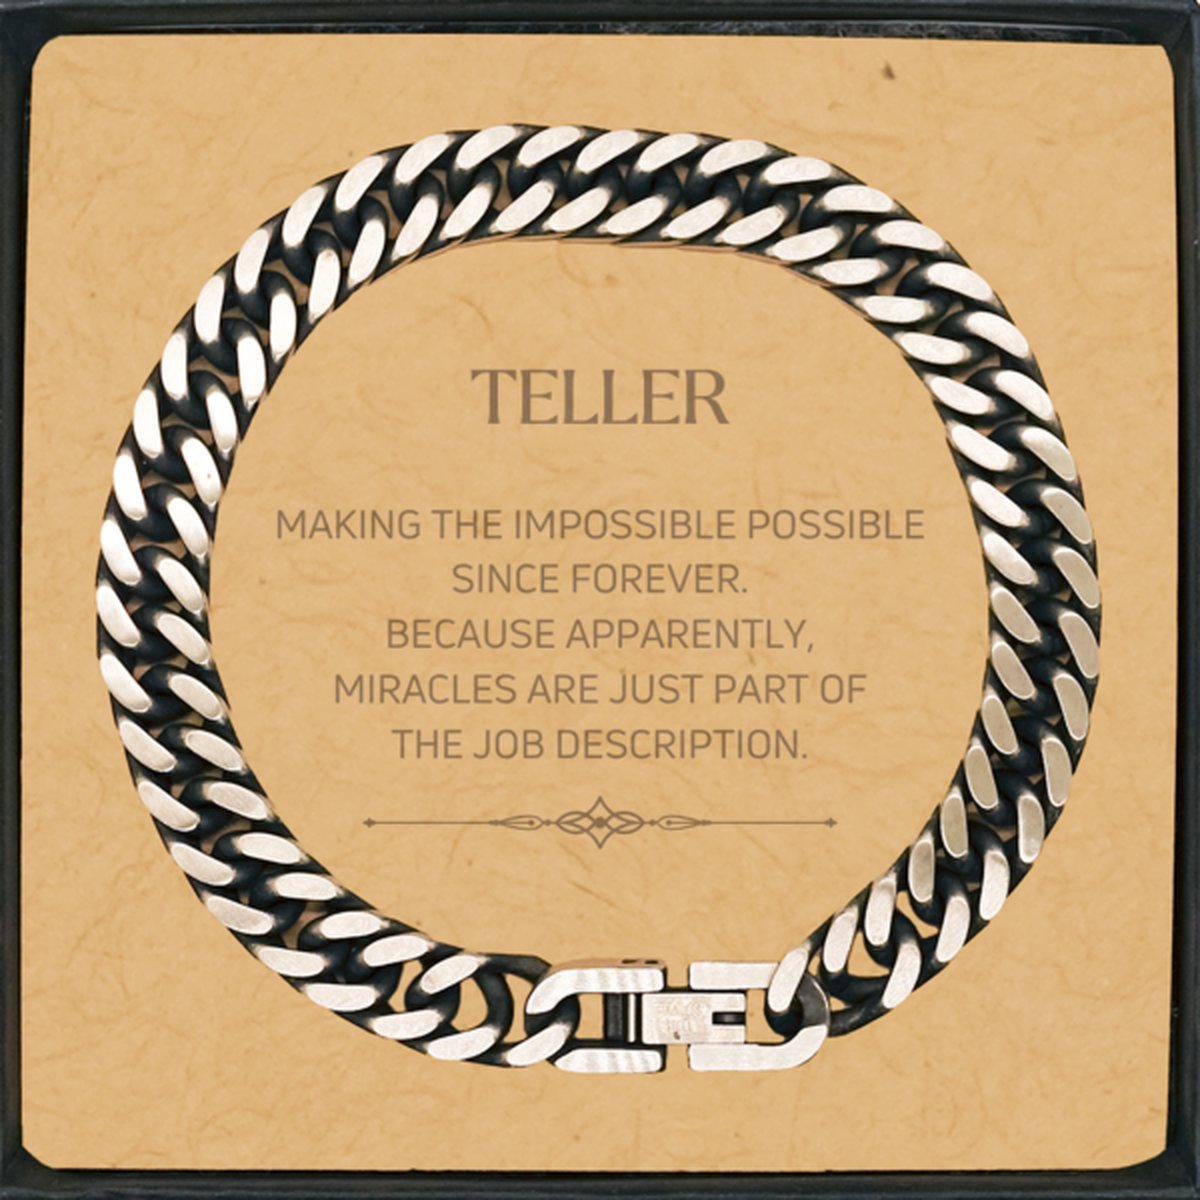 Funny Teller Gifts, Miracles are just part of the job description, Inspirational Birthday Cuban Link Chain Bracelet For Teller, Men, Women, Coworkers, Friends, Boss